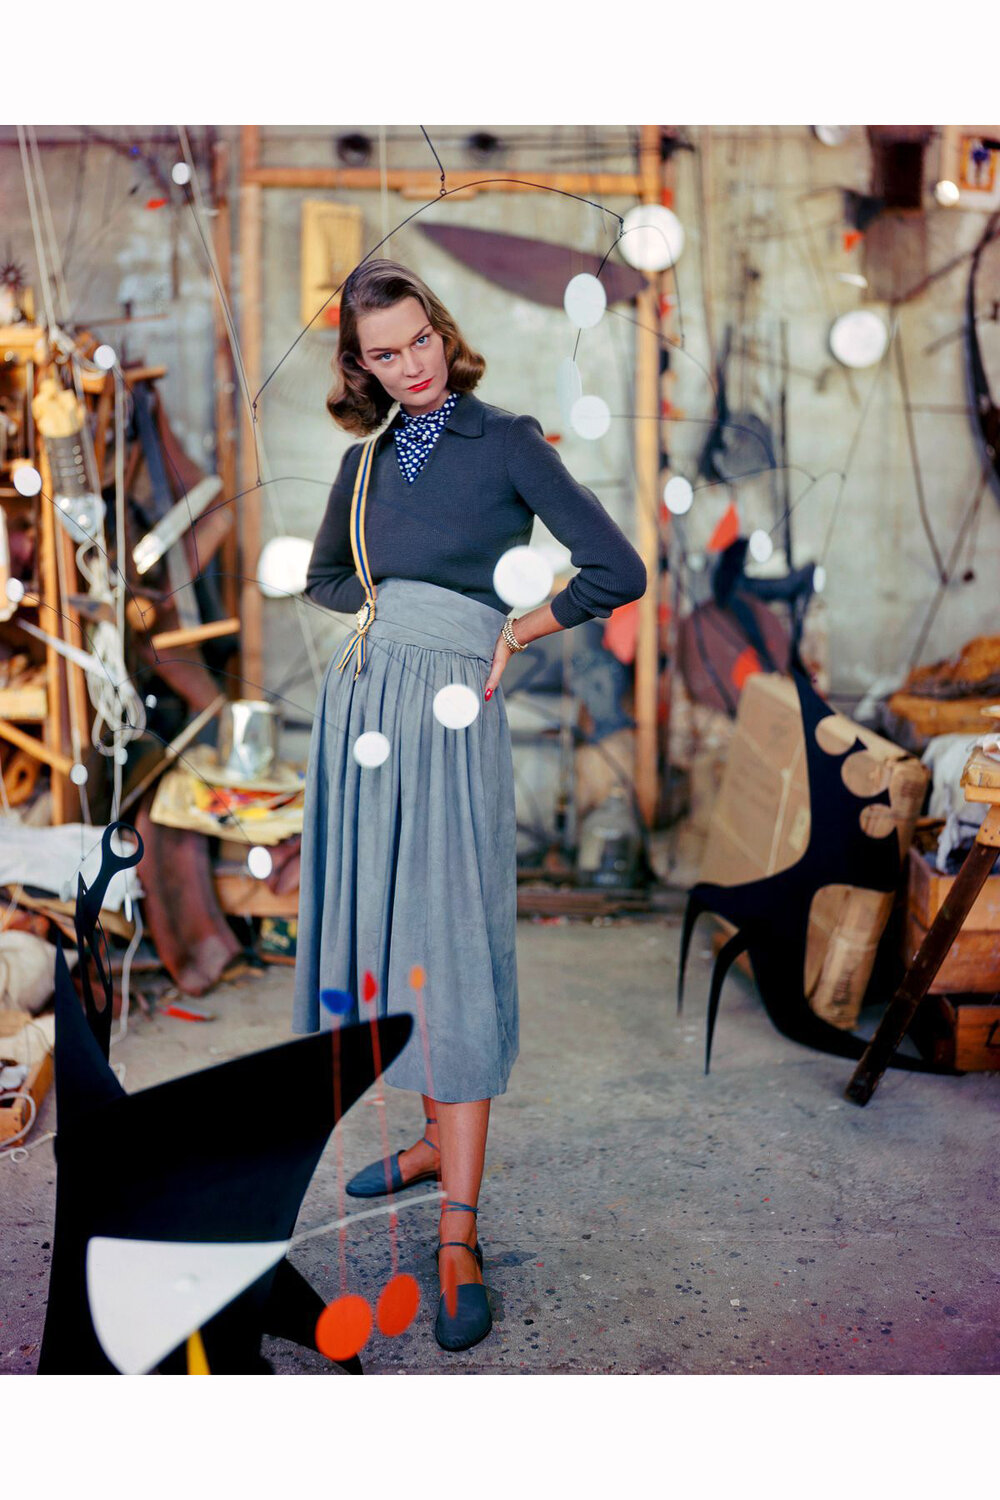 a-woman-models-a-gray-suede-skirt-in-the-studio-of-artist-alexander-calder-strolling-among-his-mobiles-1948.jpg